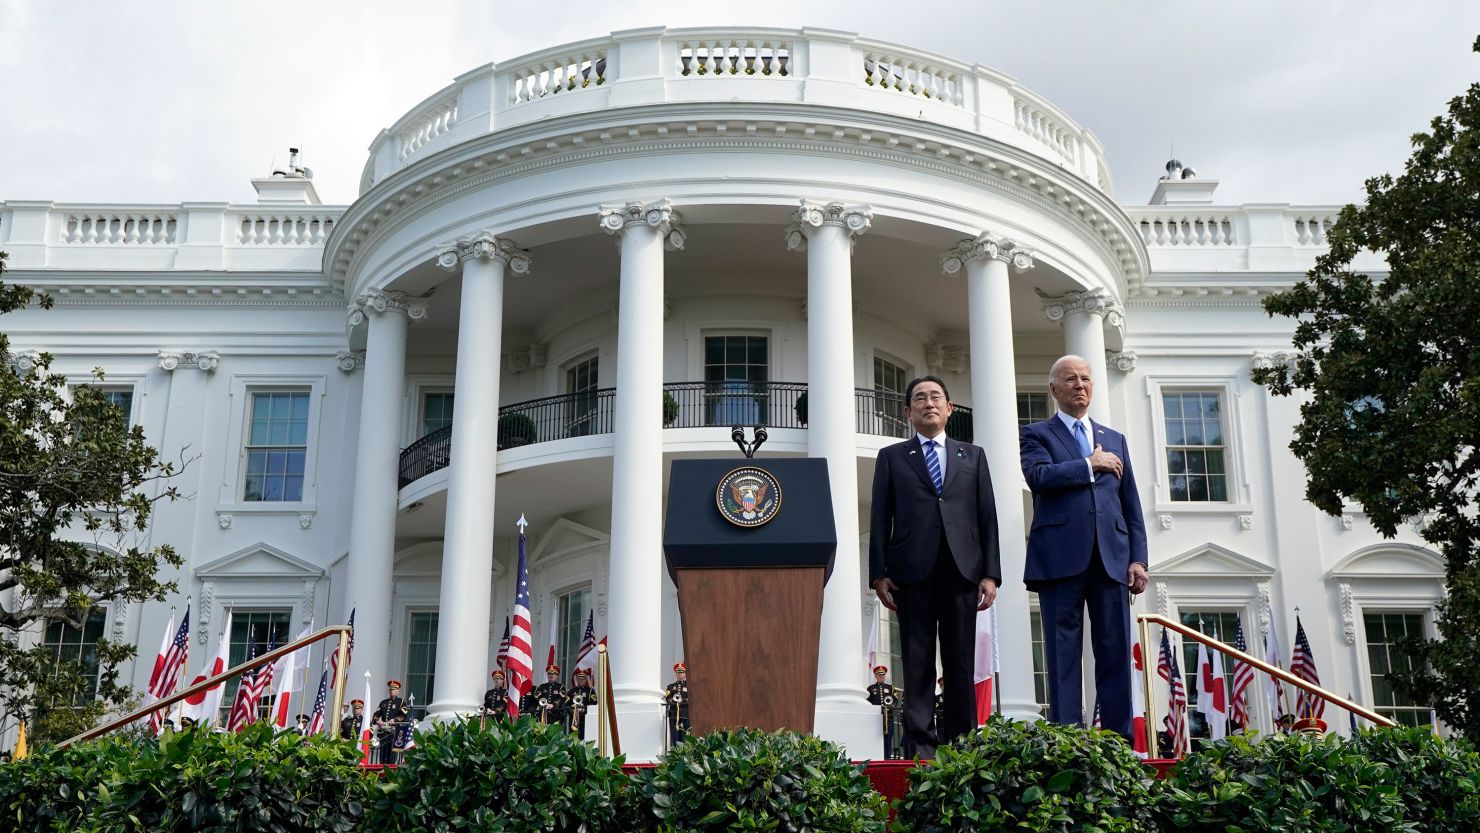 President Joe Biden and Japanese Prime Minister Fumio Kishida listen to the National Anthem during a State Arrival Ceremony on the South Lawn of the White House, Wednesday, April 10, in Washington, DC.